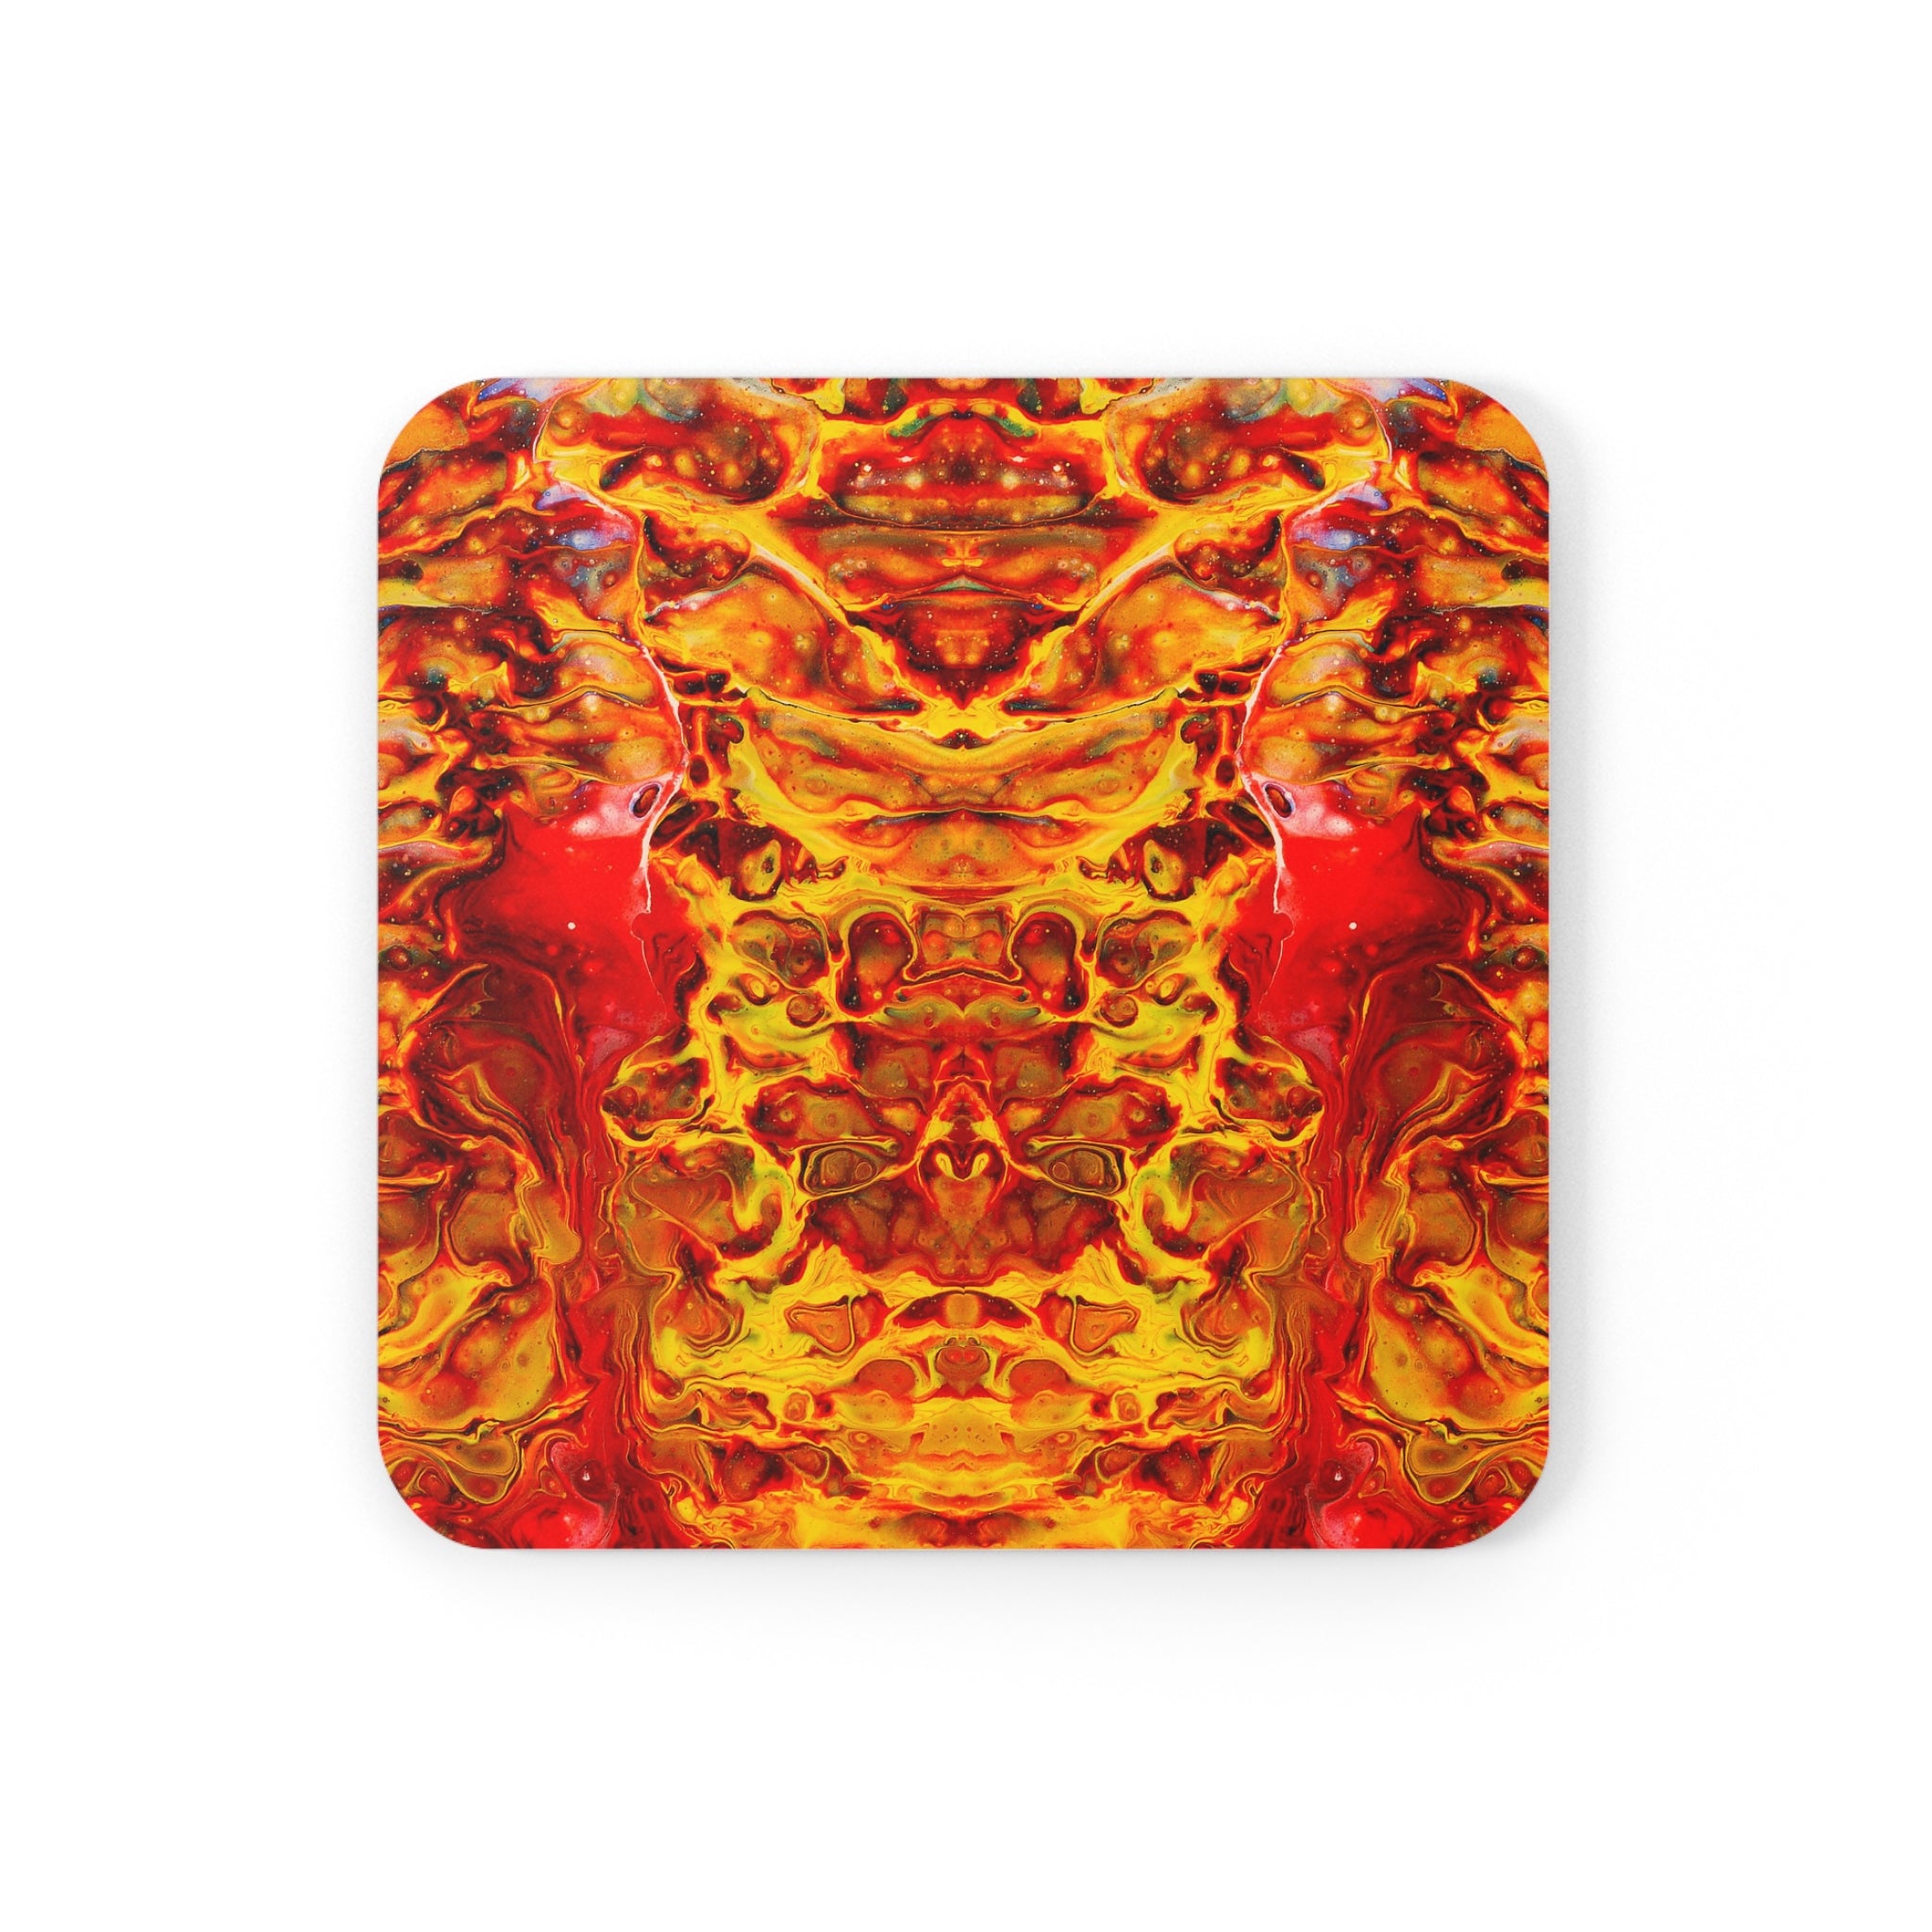 Cameron Creations - Fire Within - Stylish Coffee Coaster - Square Front